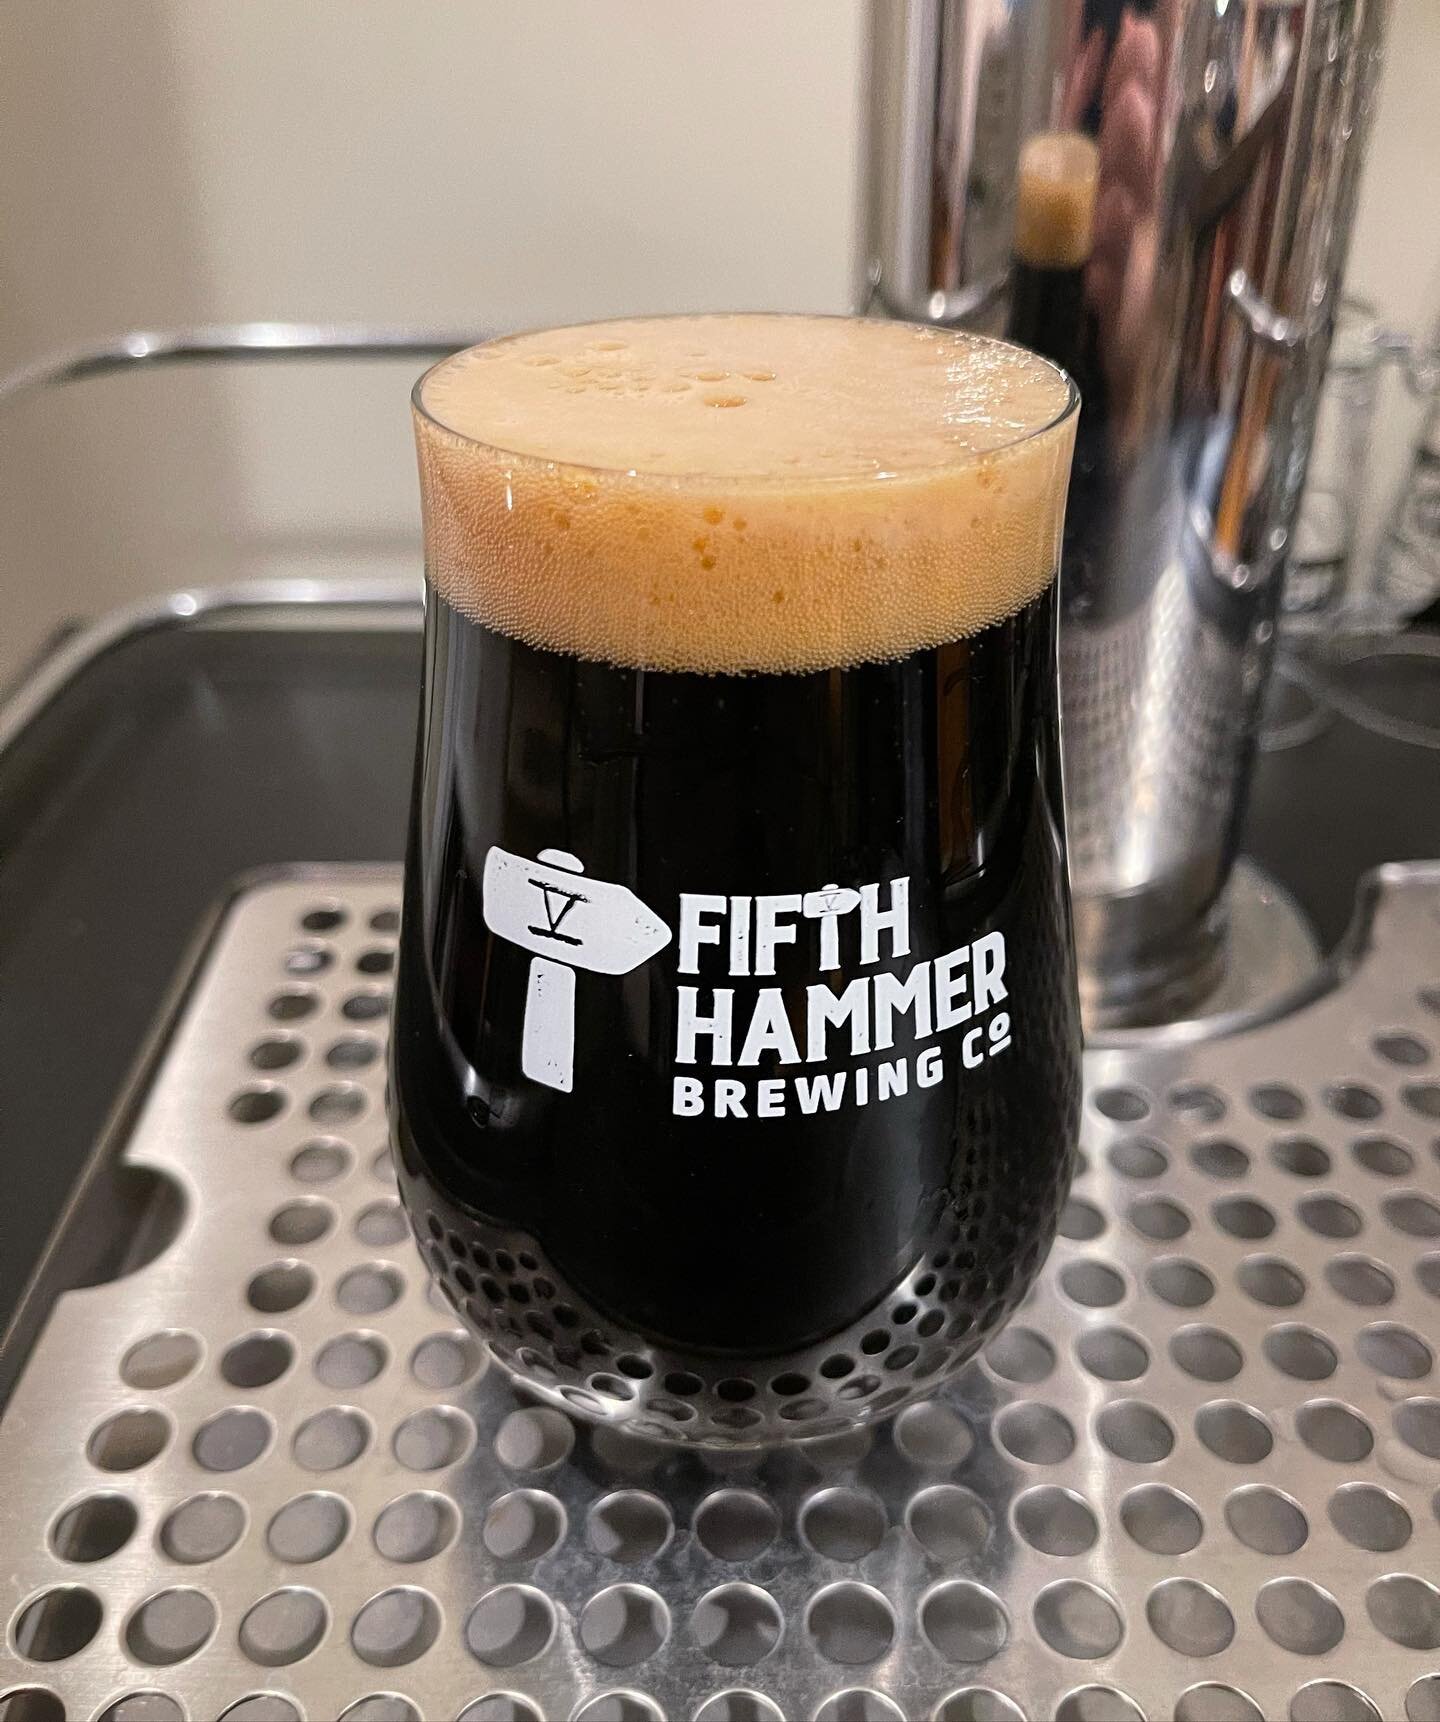 to cap this very exciting and historic inauguration day i&rsquo;m tasting a nice pour of this 11% vanilla bean imperial stout. smooth, delicious and equal parts vanilla and chocolate roast, this is up on one of the best beers i&rsquo;ve made. ferment